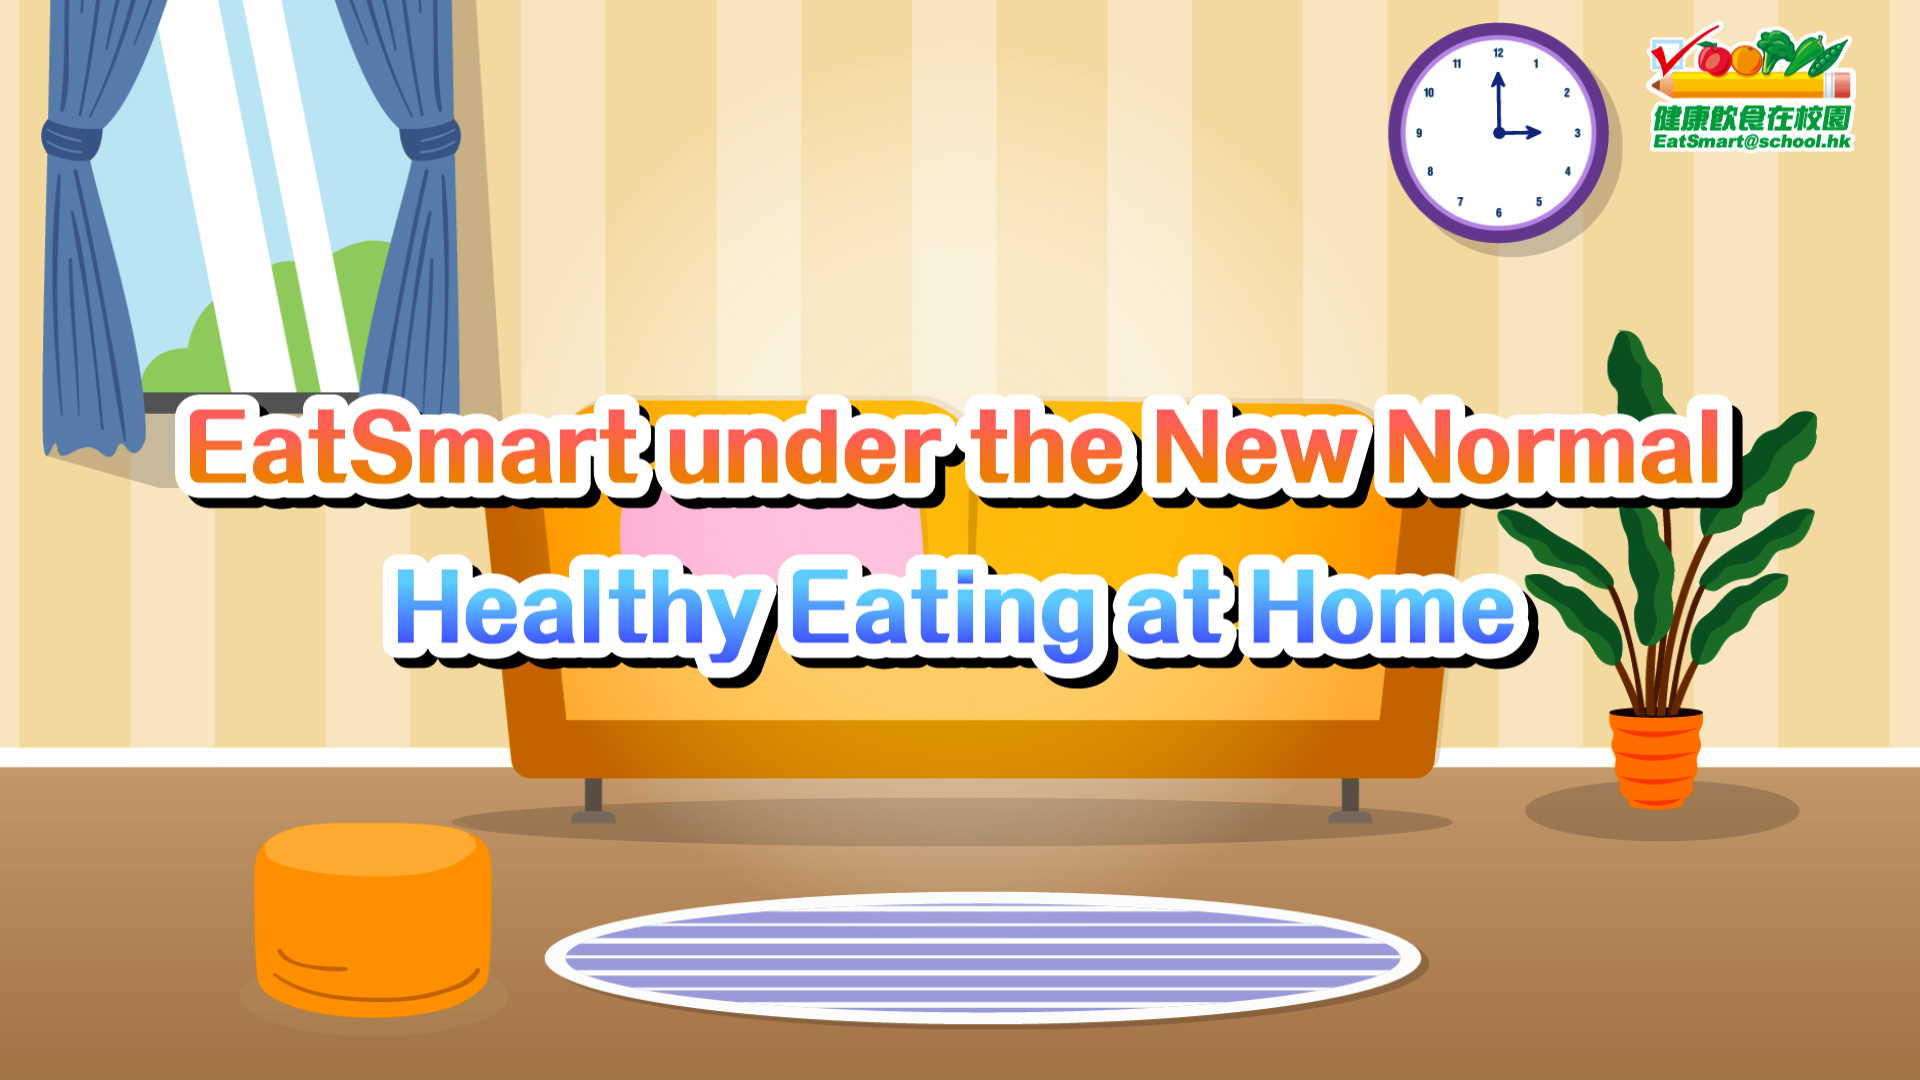 Part 4 - EatSmart under the New Normal - Healthy Eating at Home